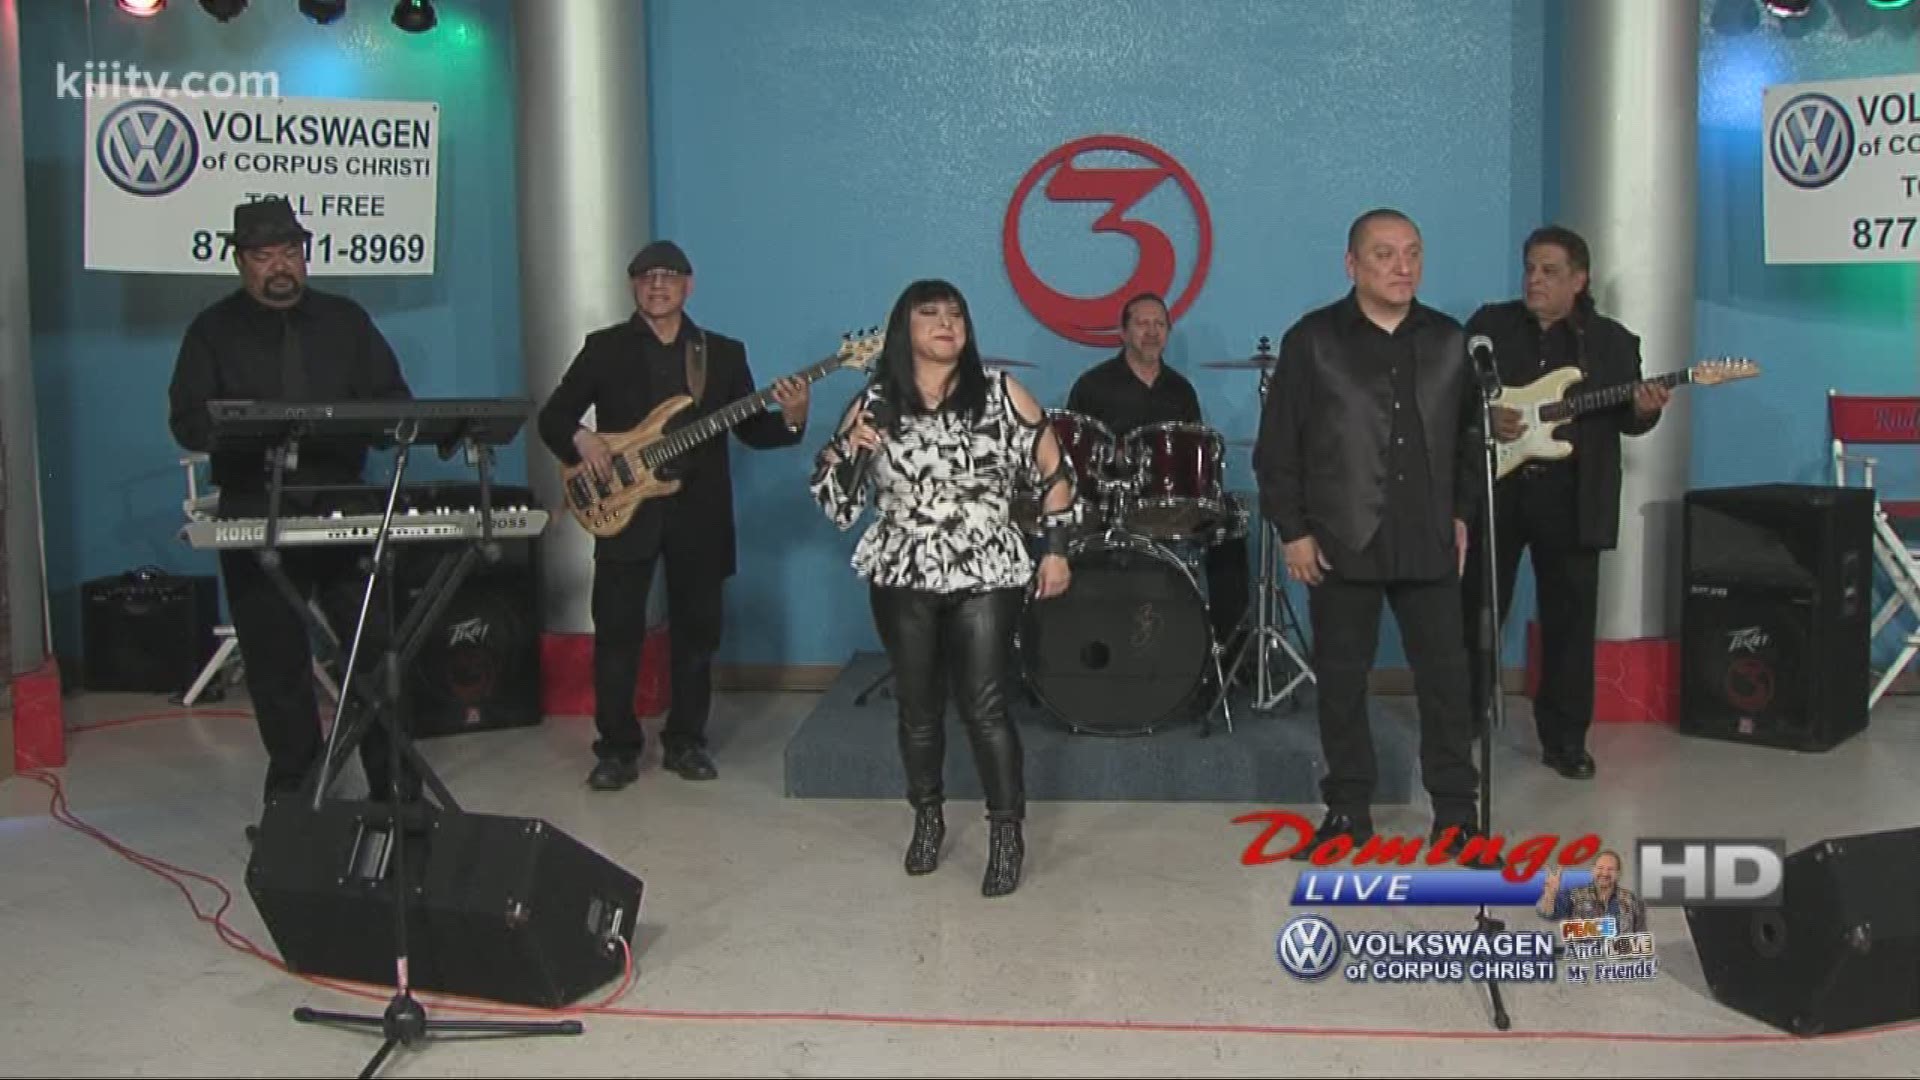 Sound Rave Band performing "My Dearest Darling" on Domingo Live!